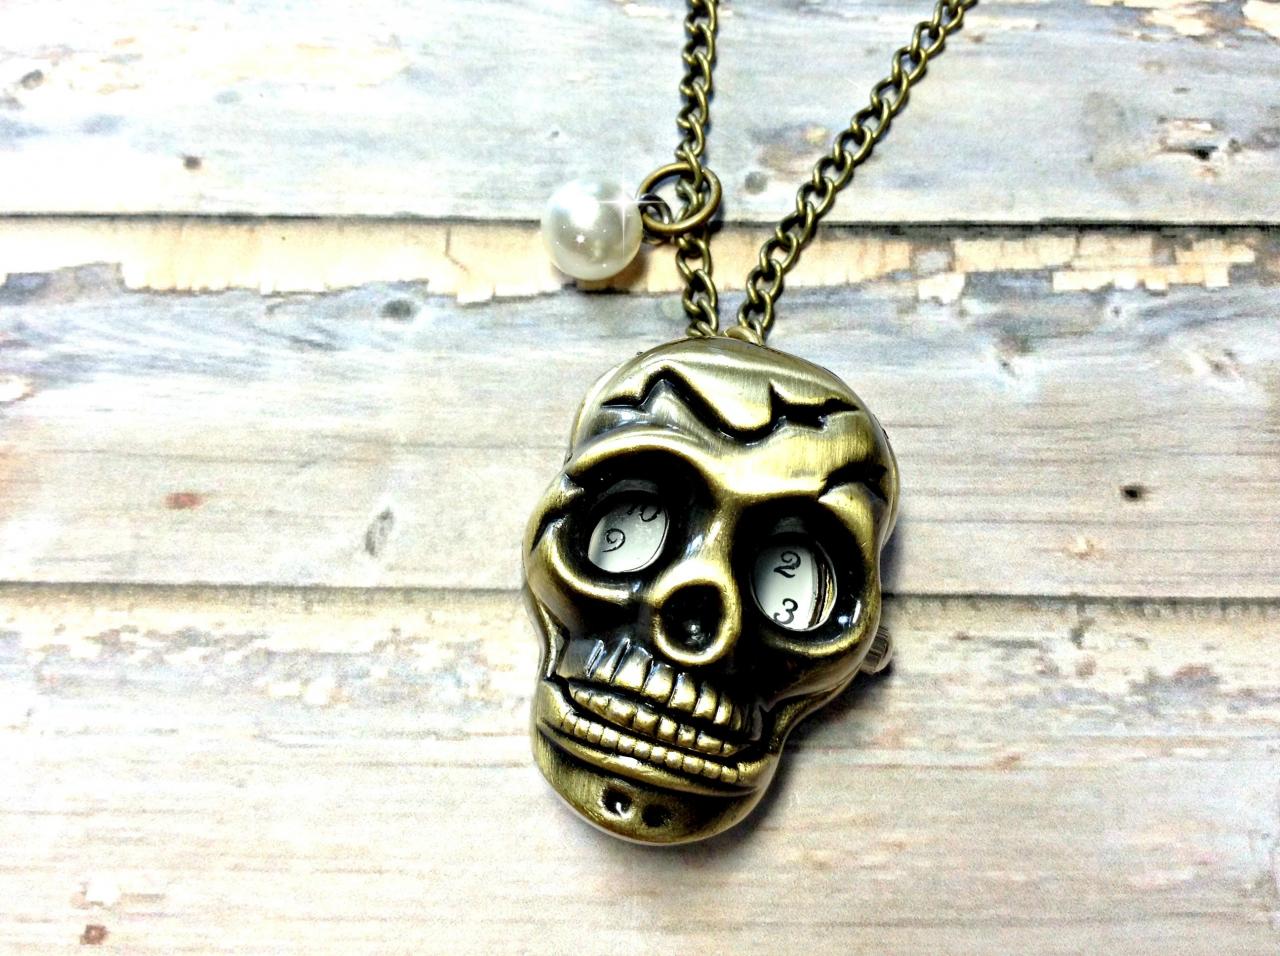 Handmade Vintage Skull Pocket Watch Necklace With Pearl Pendant